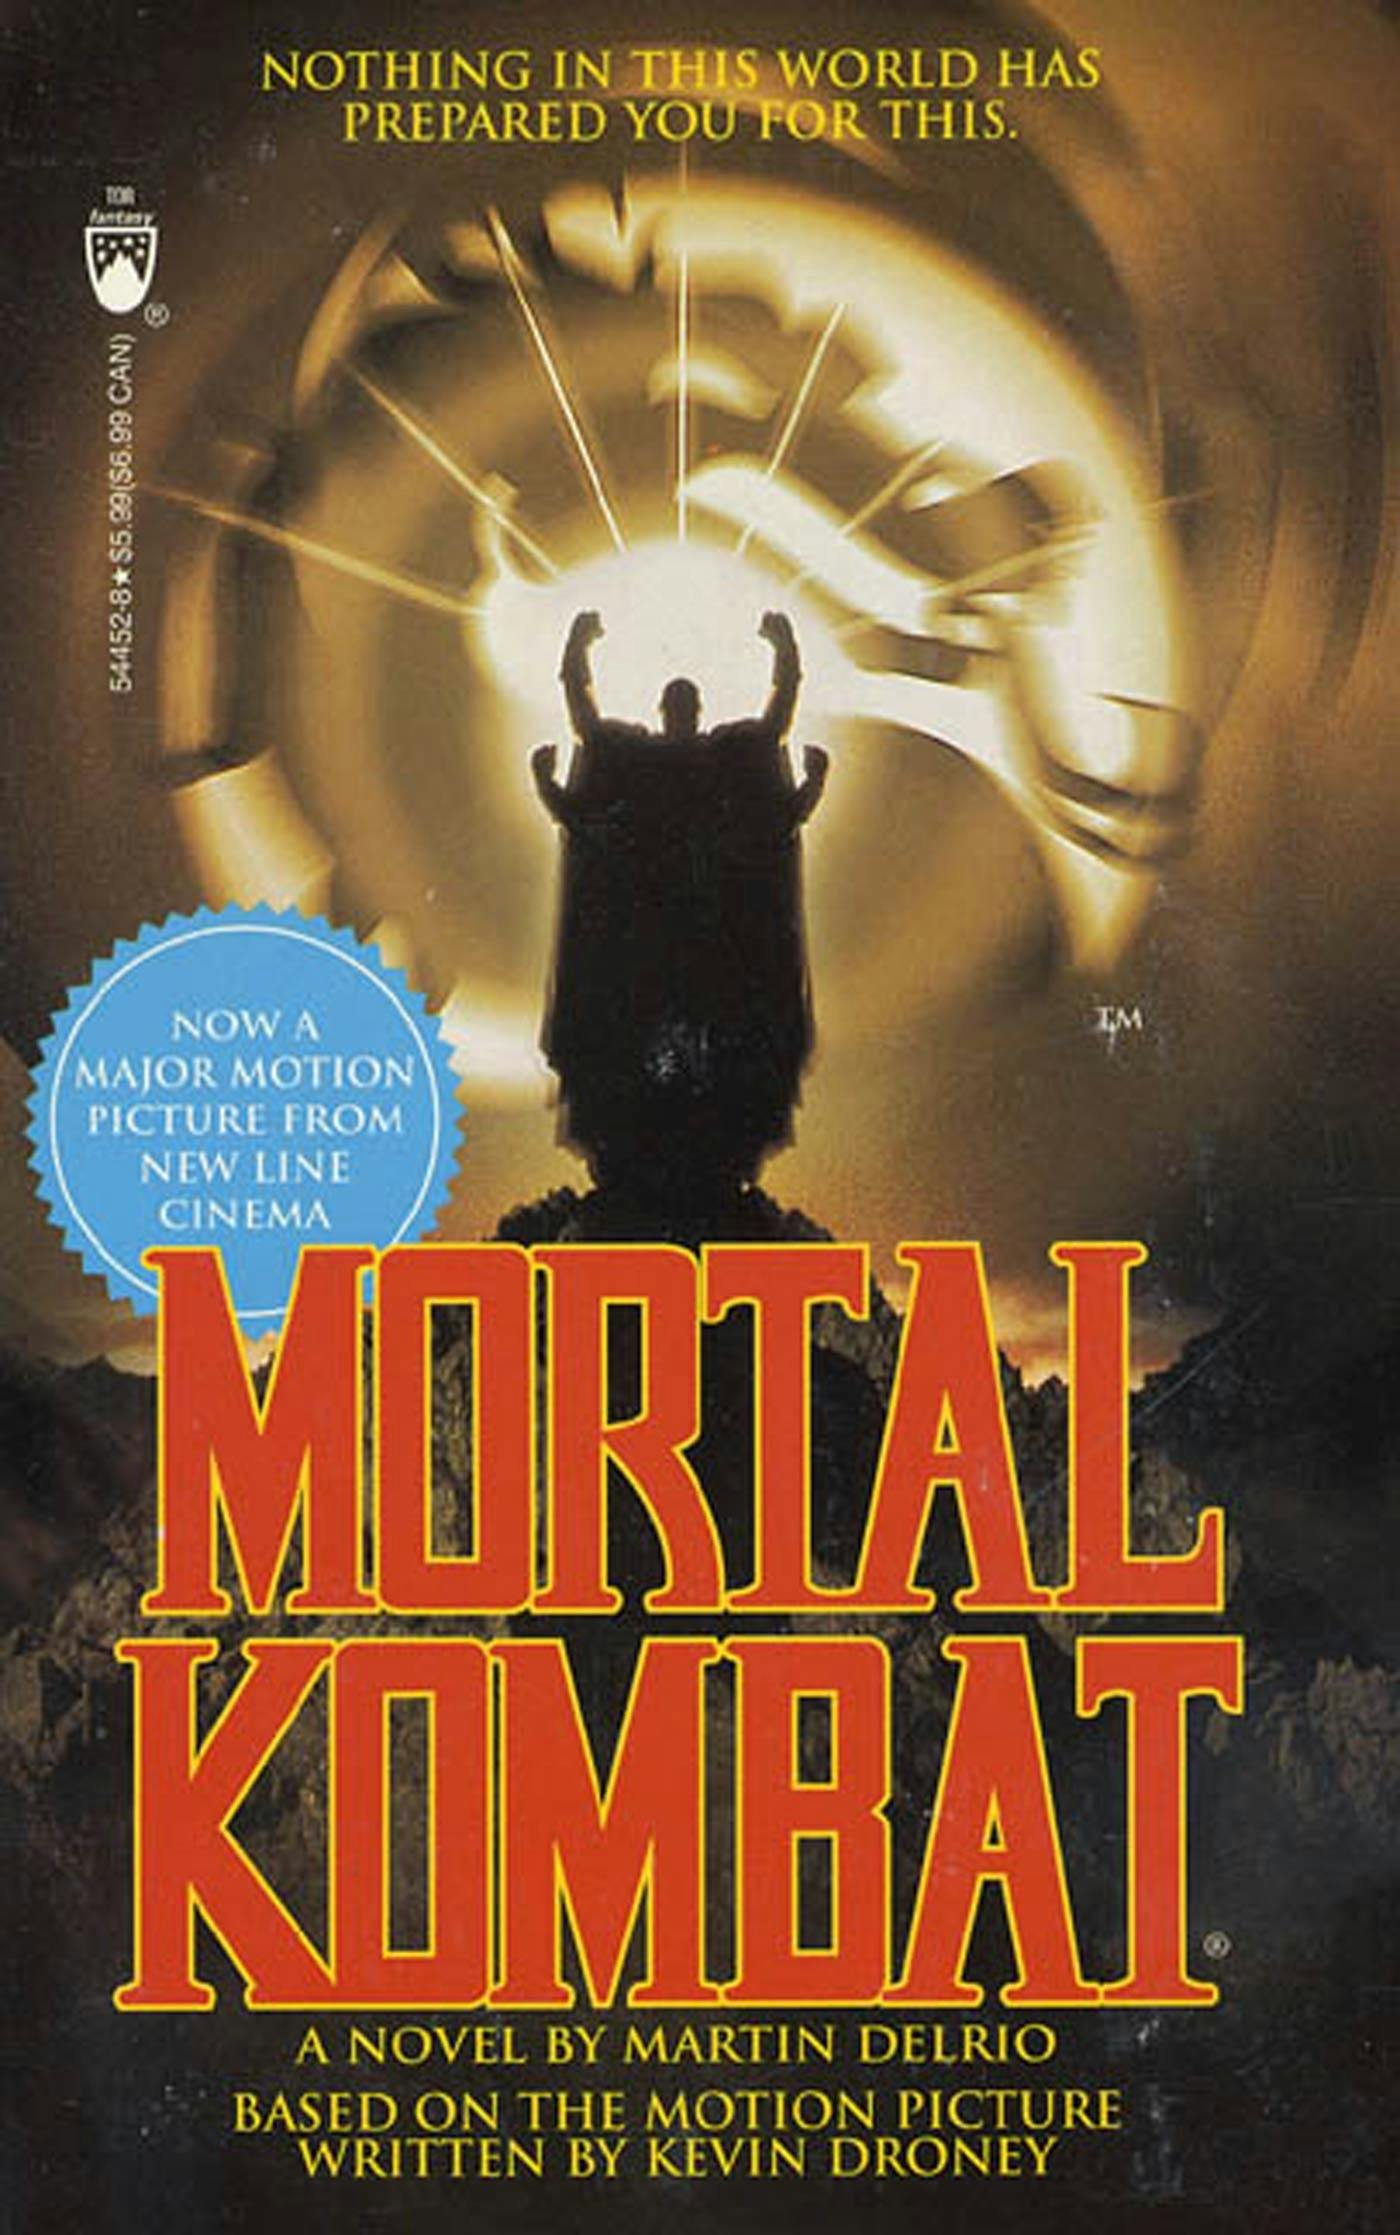 Cover for the book titled as: Mortal Kombat